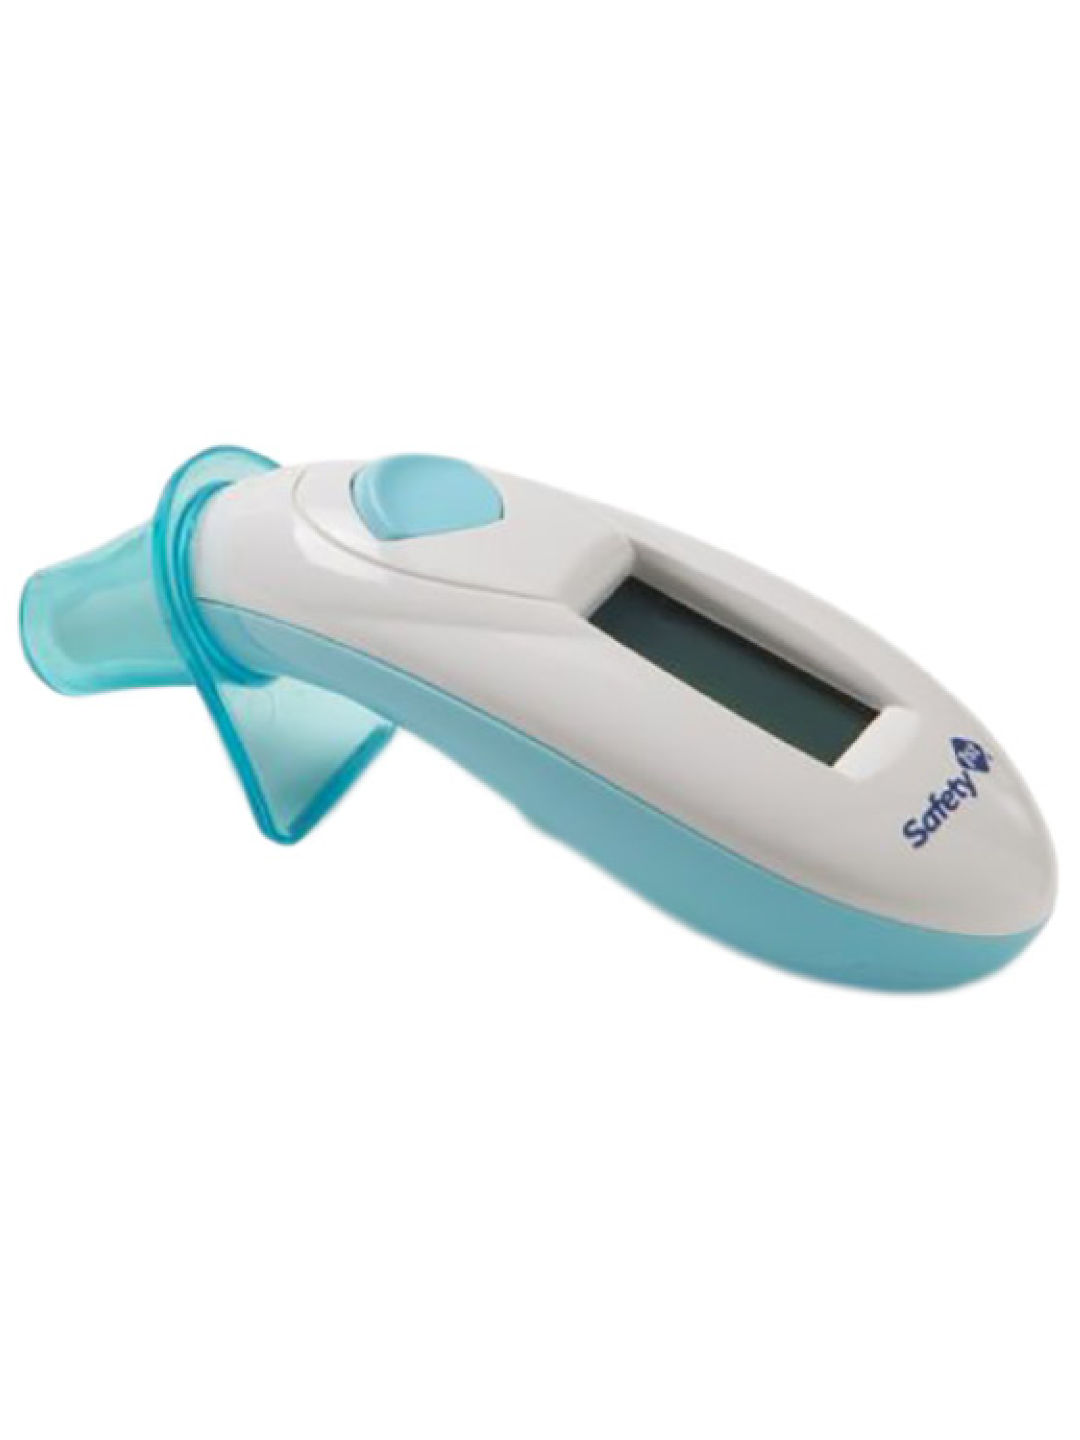 Safety 1st Quick Read Ear Thermometer (Blue- Image 1)